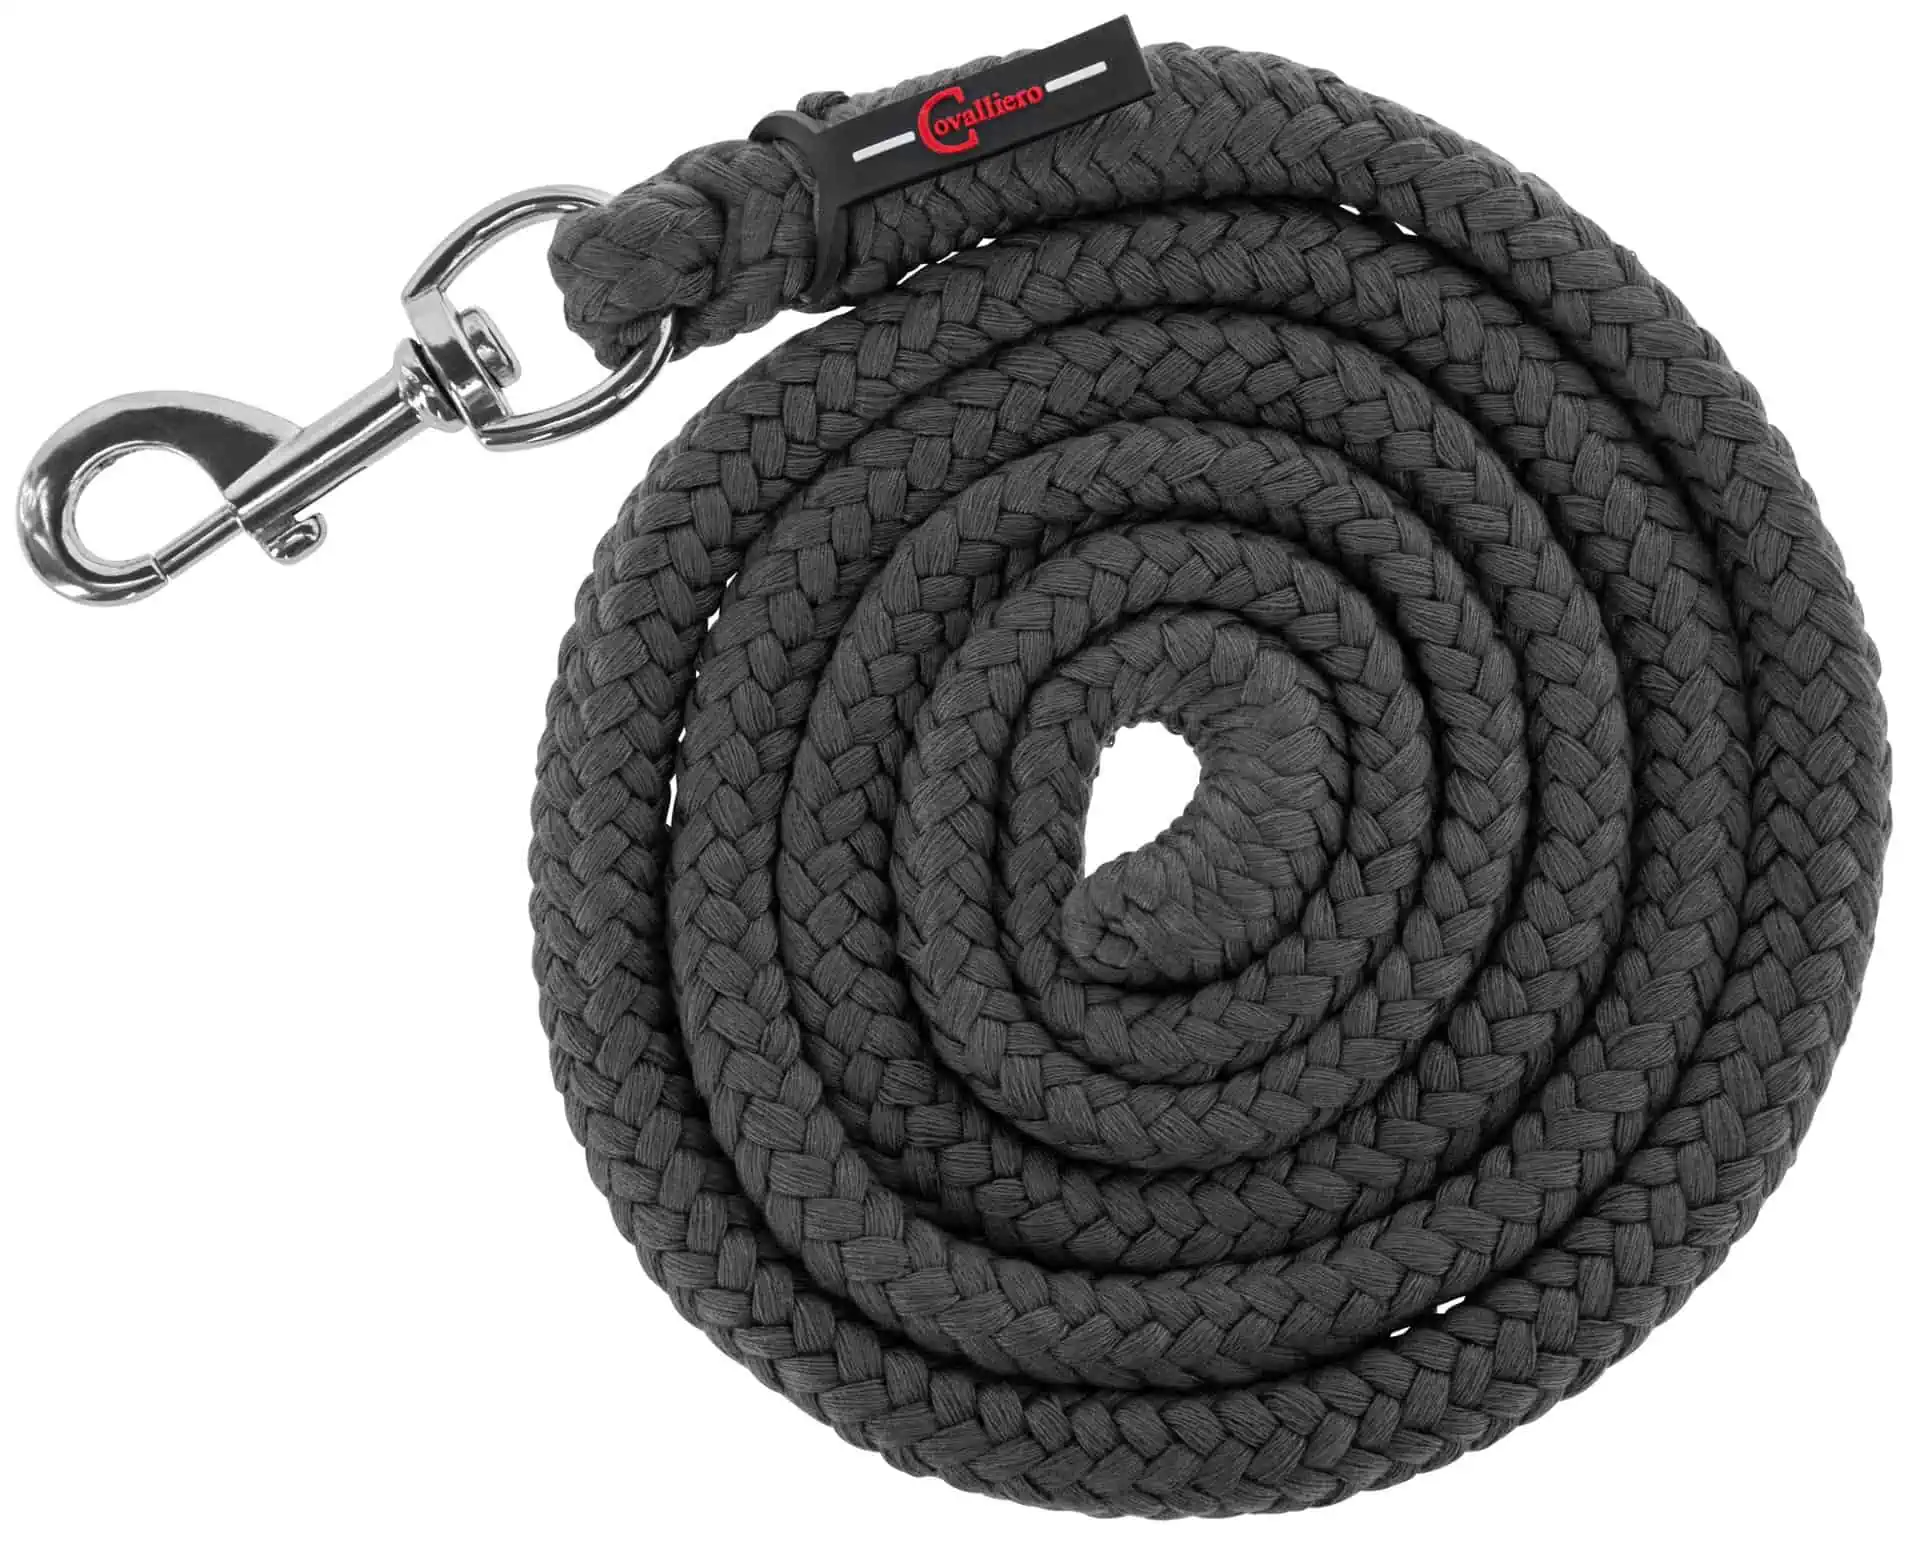 Lead Rope ClassicSoft stone, with Snap Hook